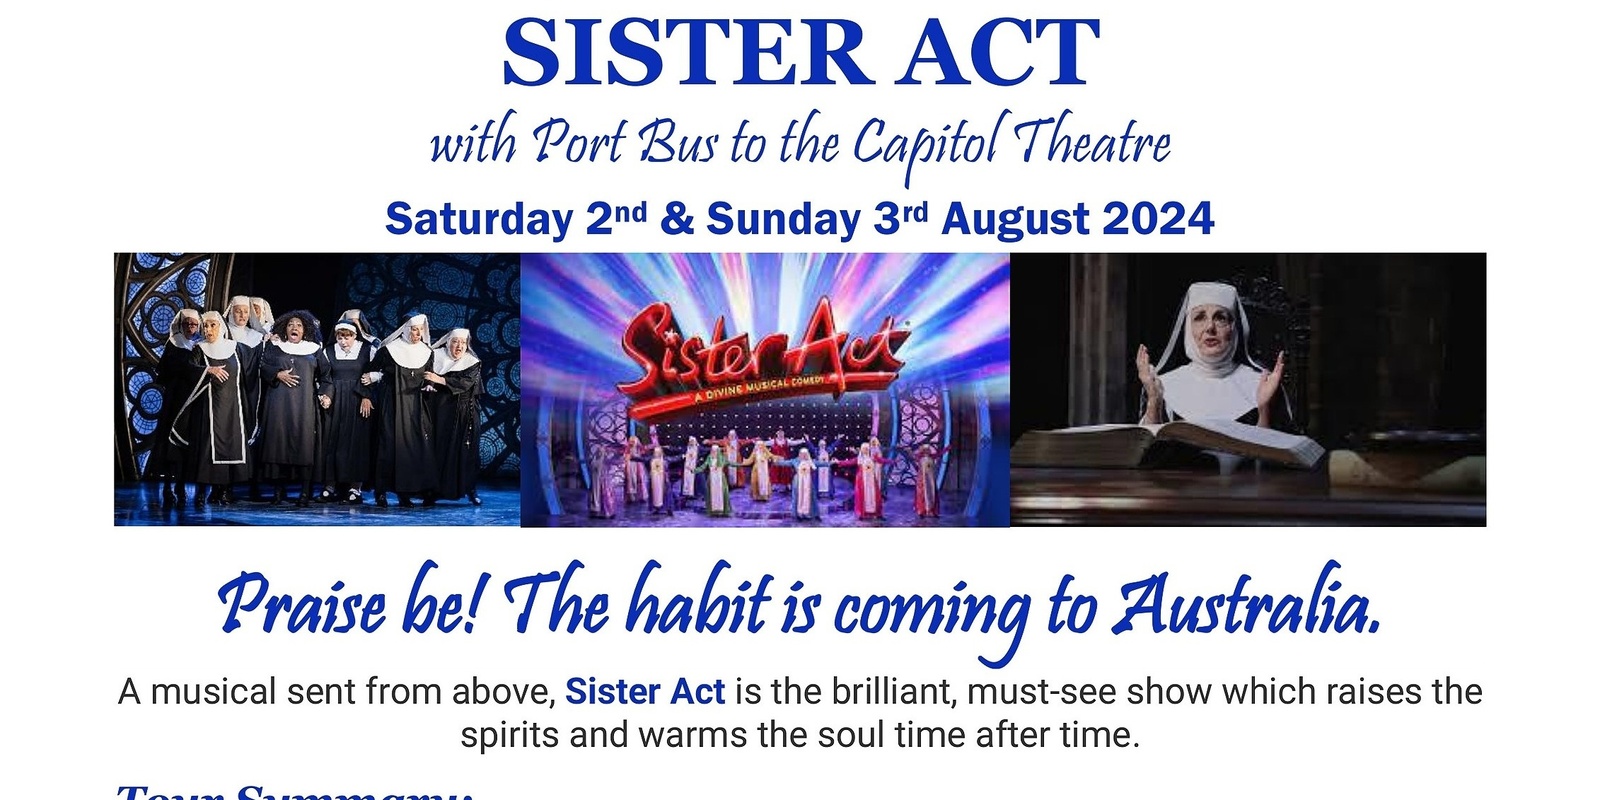 Banner image for SISTER ACT